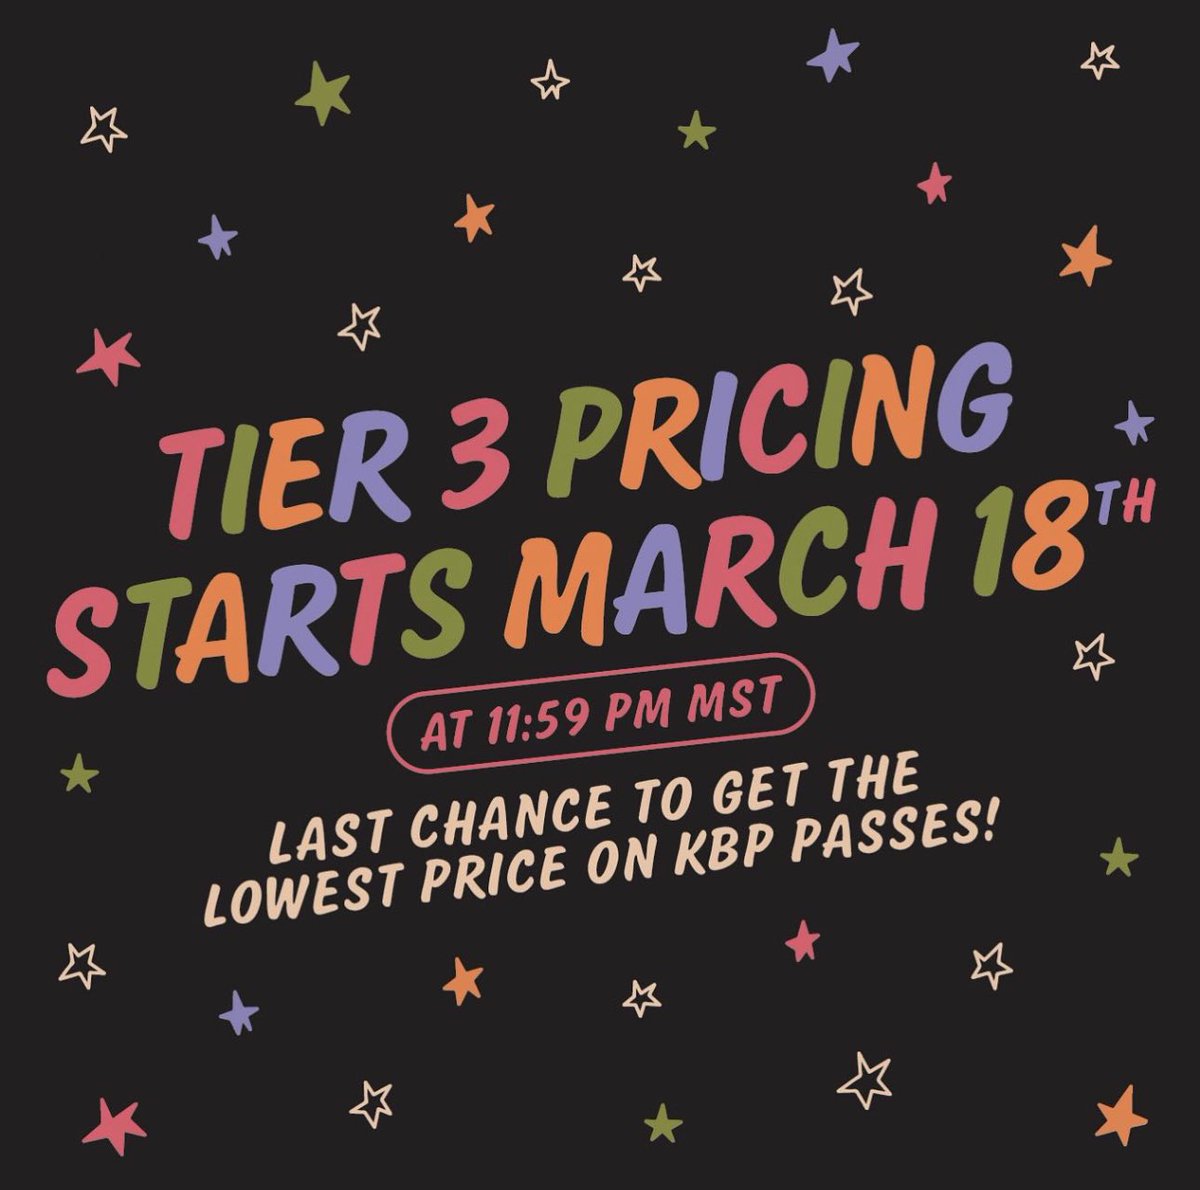 Ticket prices increase to Tier 3 TONIGHT at 11:59pm MST. Grab tickets now before prices go up‼️ 3-Day VIP is almost totally SOLD OUT, tickets and info at kilbyblockparty.com